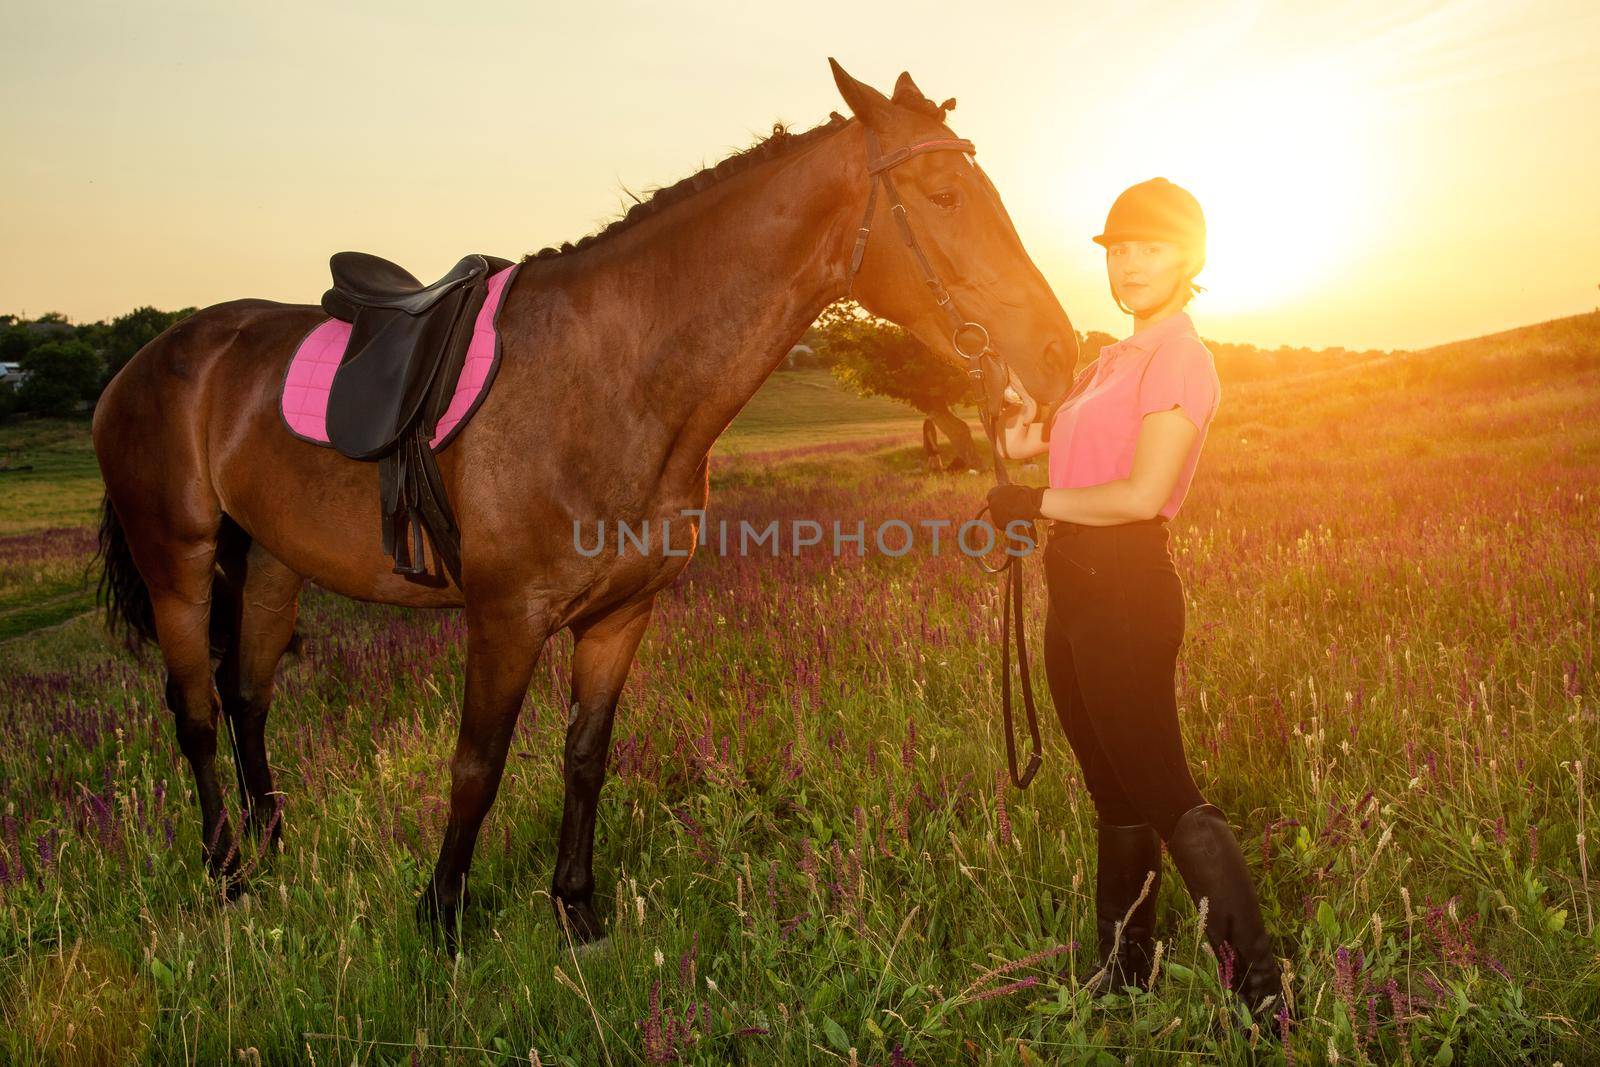 Beautiful smiling girl jockey stand next to her brown horse wearing special uniform on a sky and green field background on a sunset. Equitation sport competition and activity.